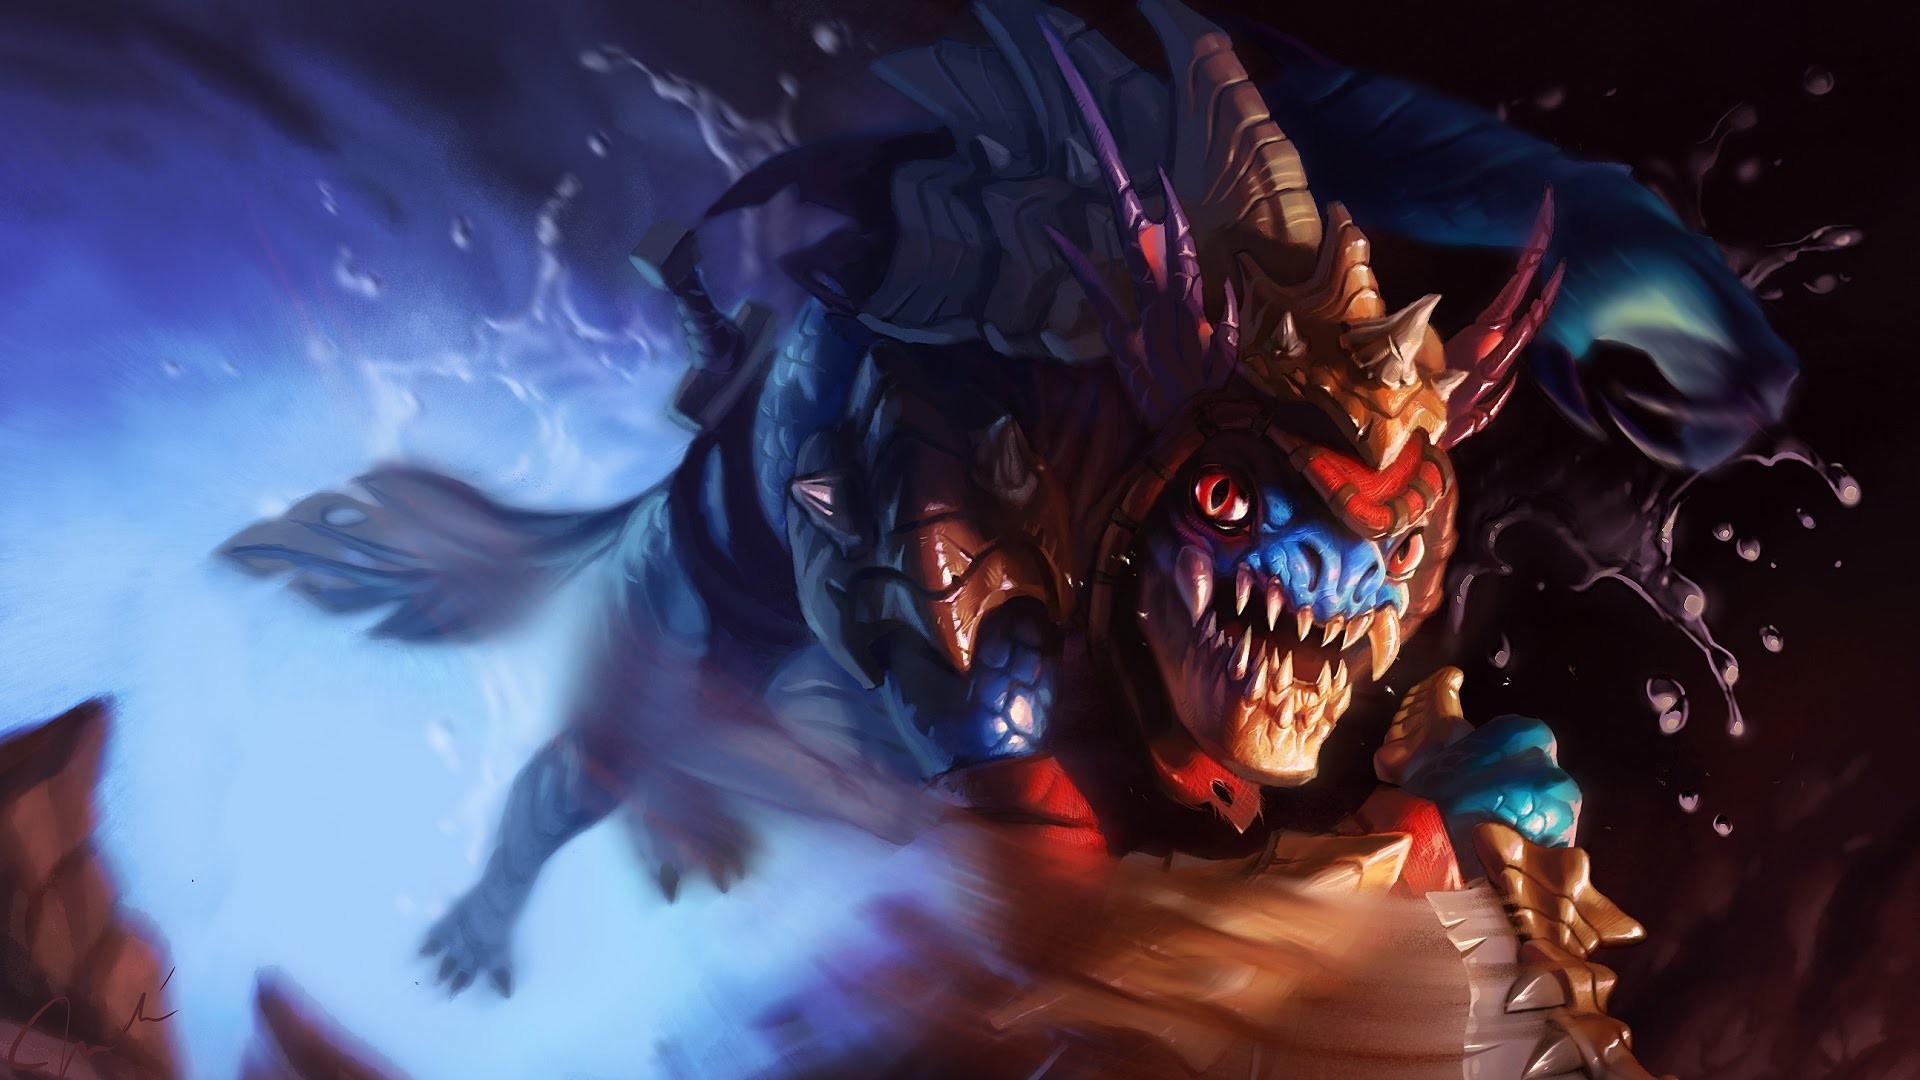 1920x1080 Search Results for “slark dota 2 wallpaper hd” – Adorable Wallpapers